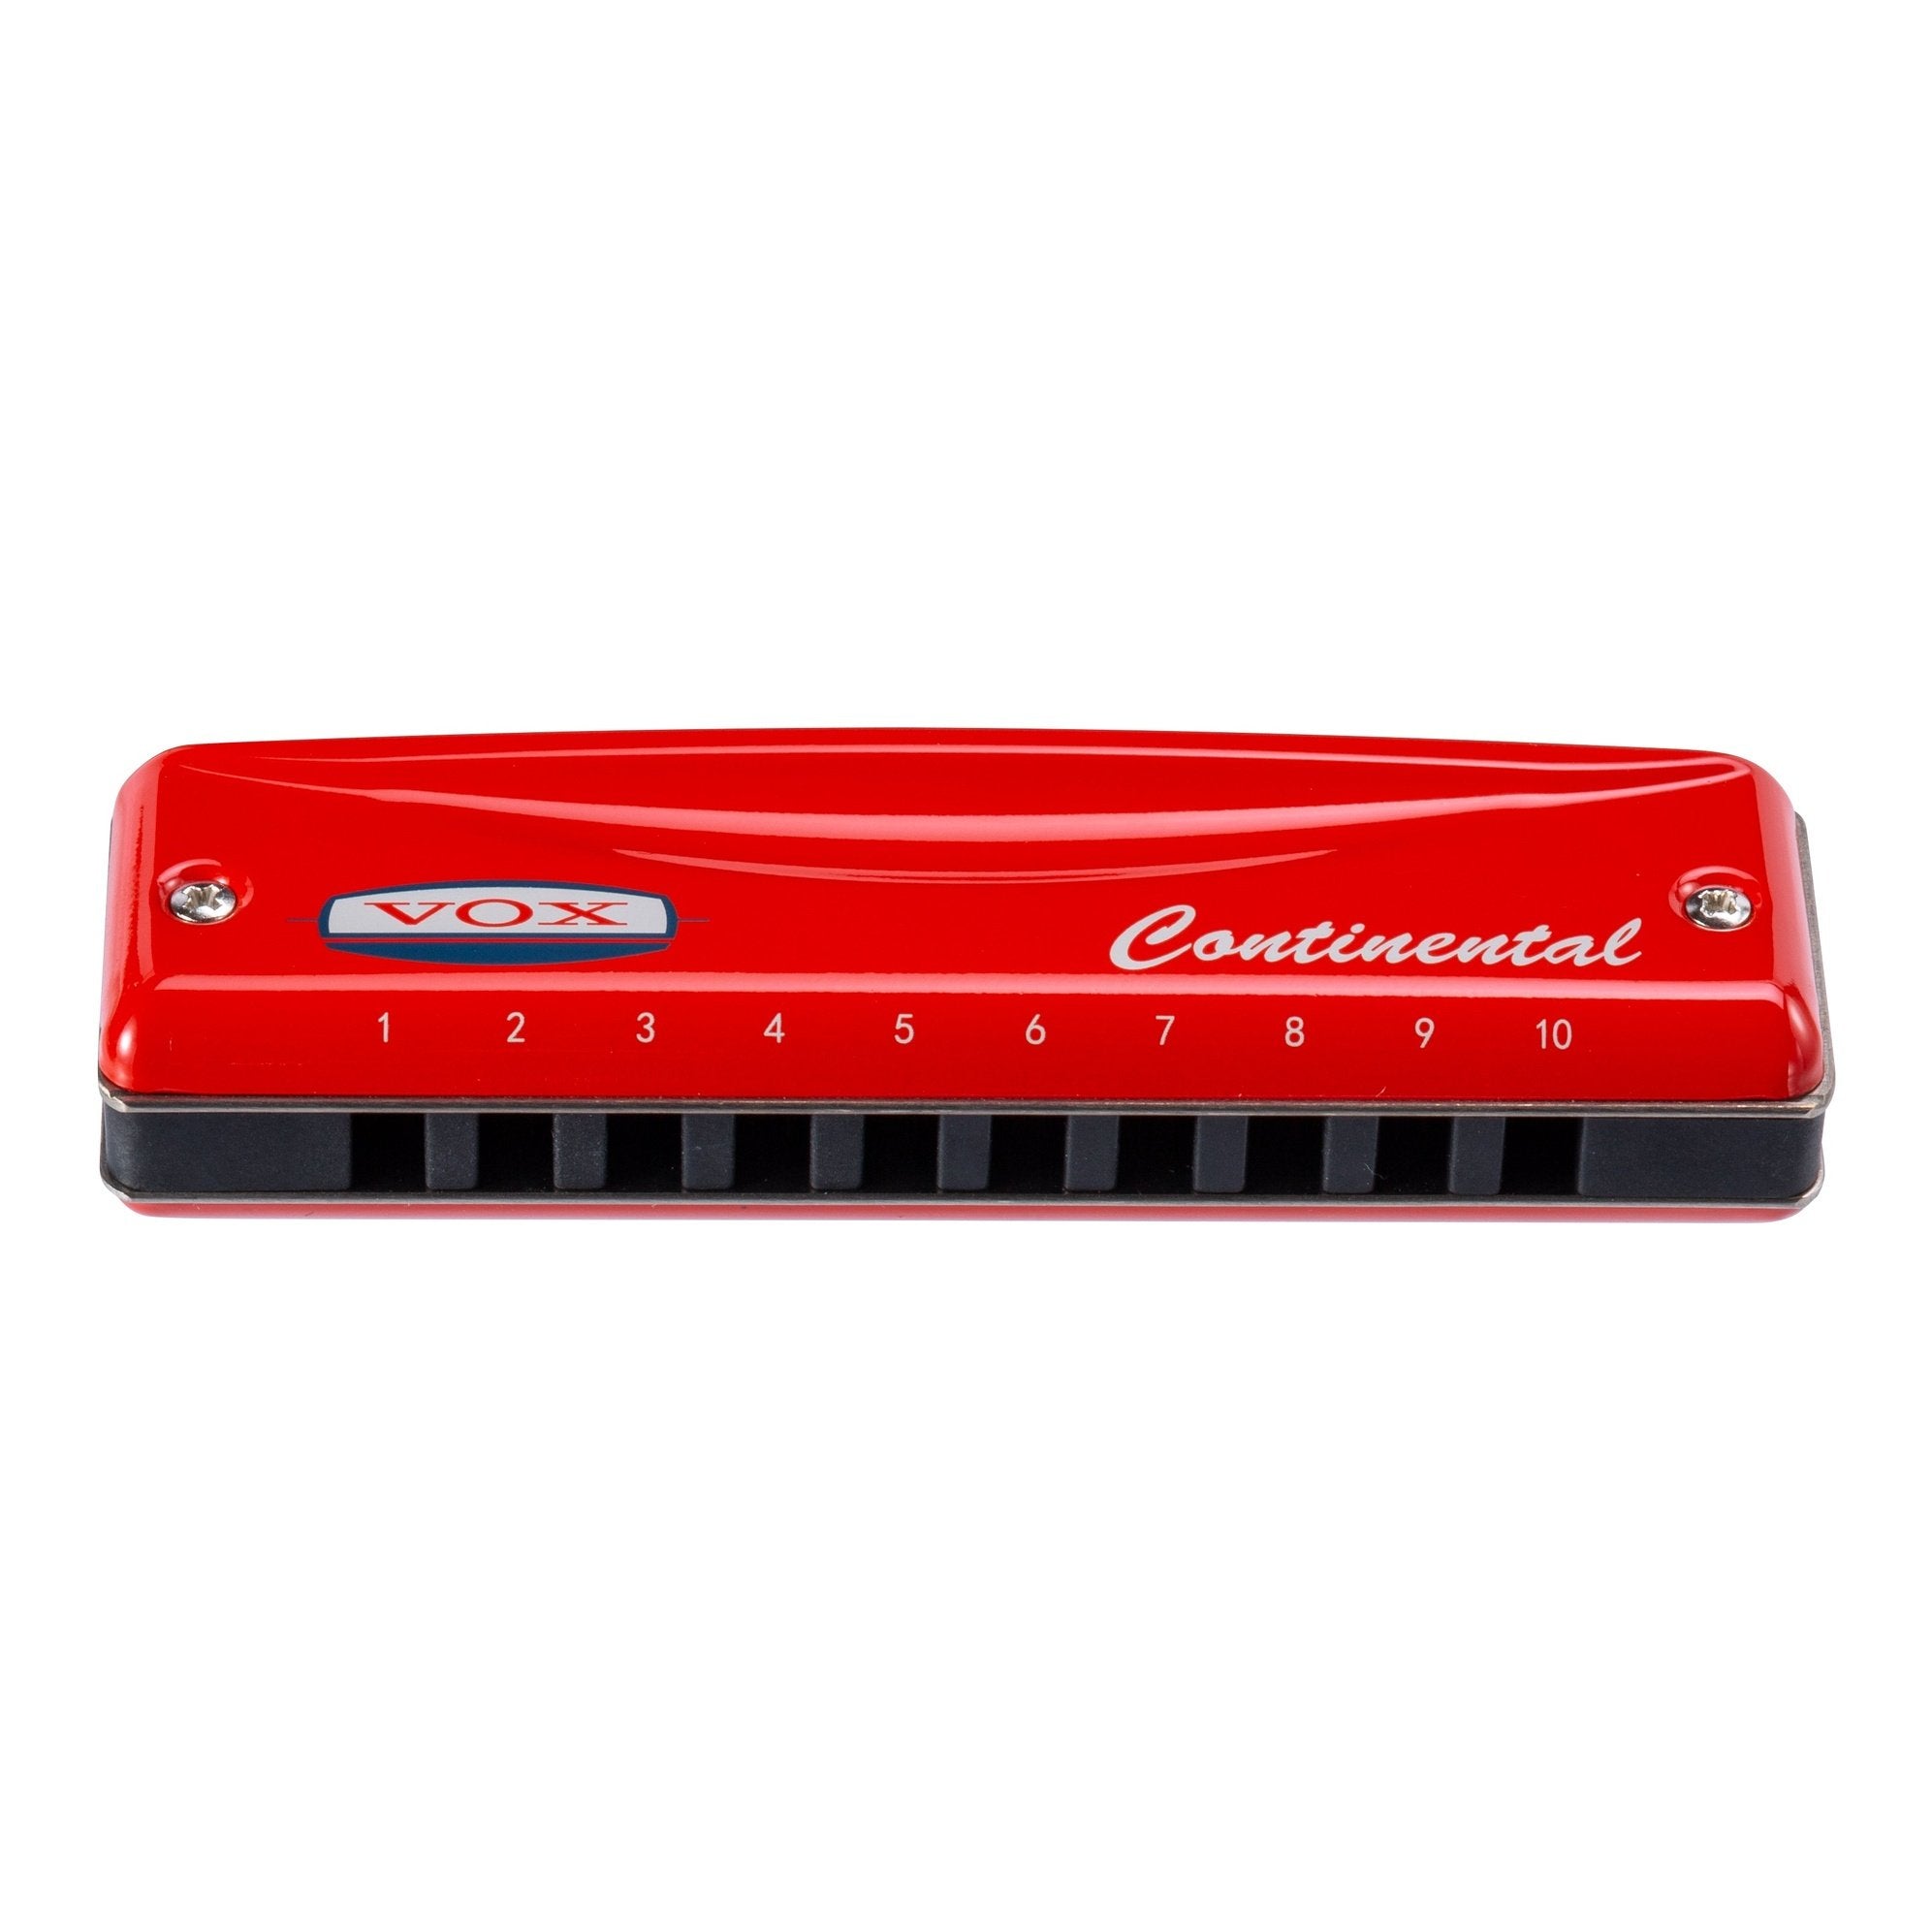 Vox Continental Harmonica - Key of A 1